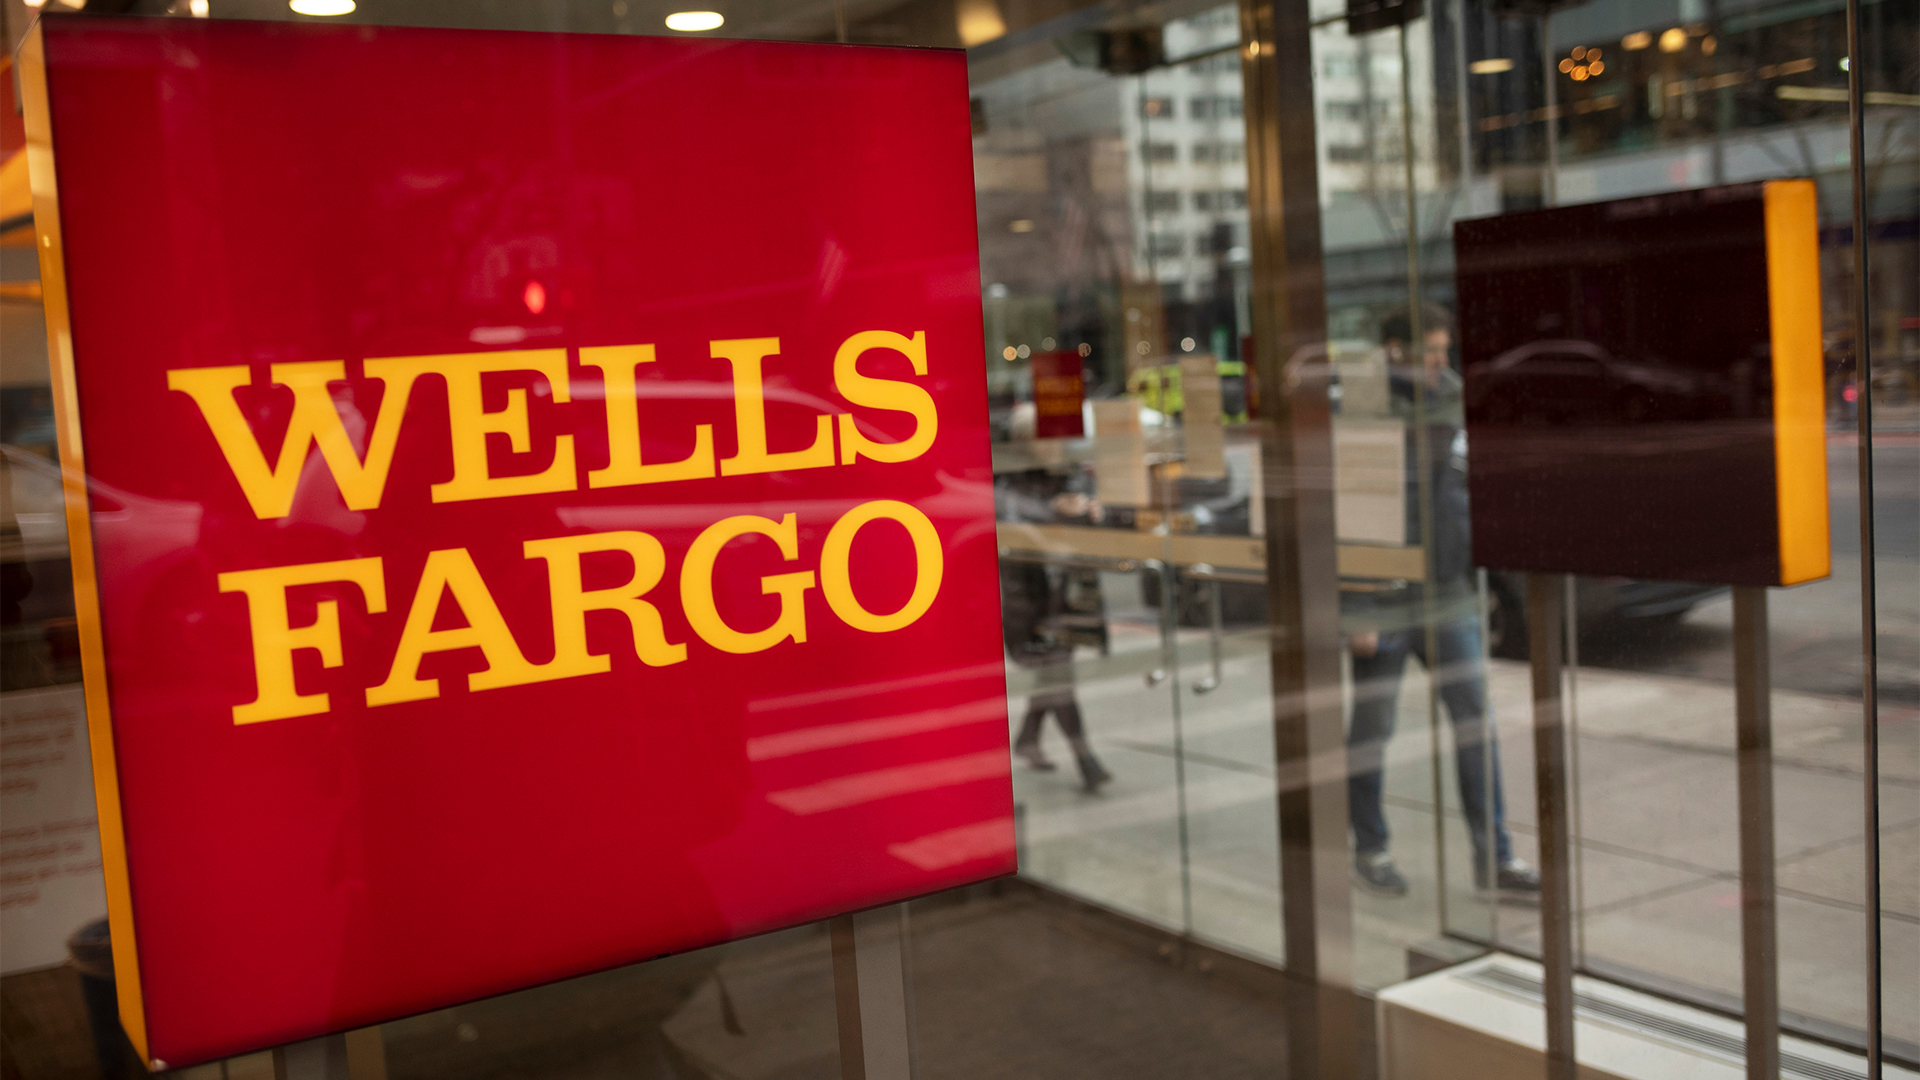 Wells Fargo Under Fire Again For 'Discriminatory Modern Day 'Redlining' Practices,' According To A New Lawsuit